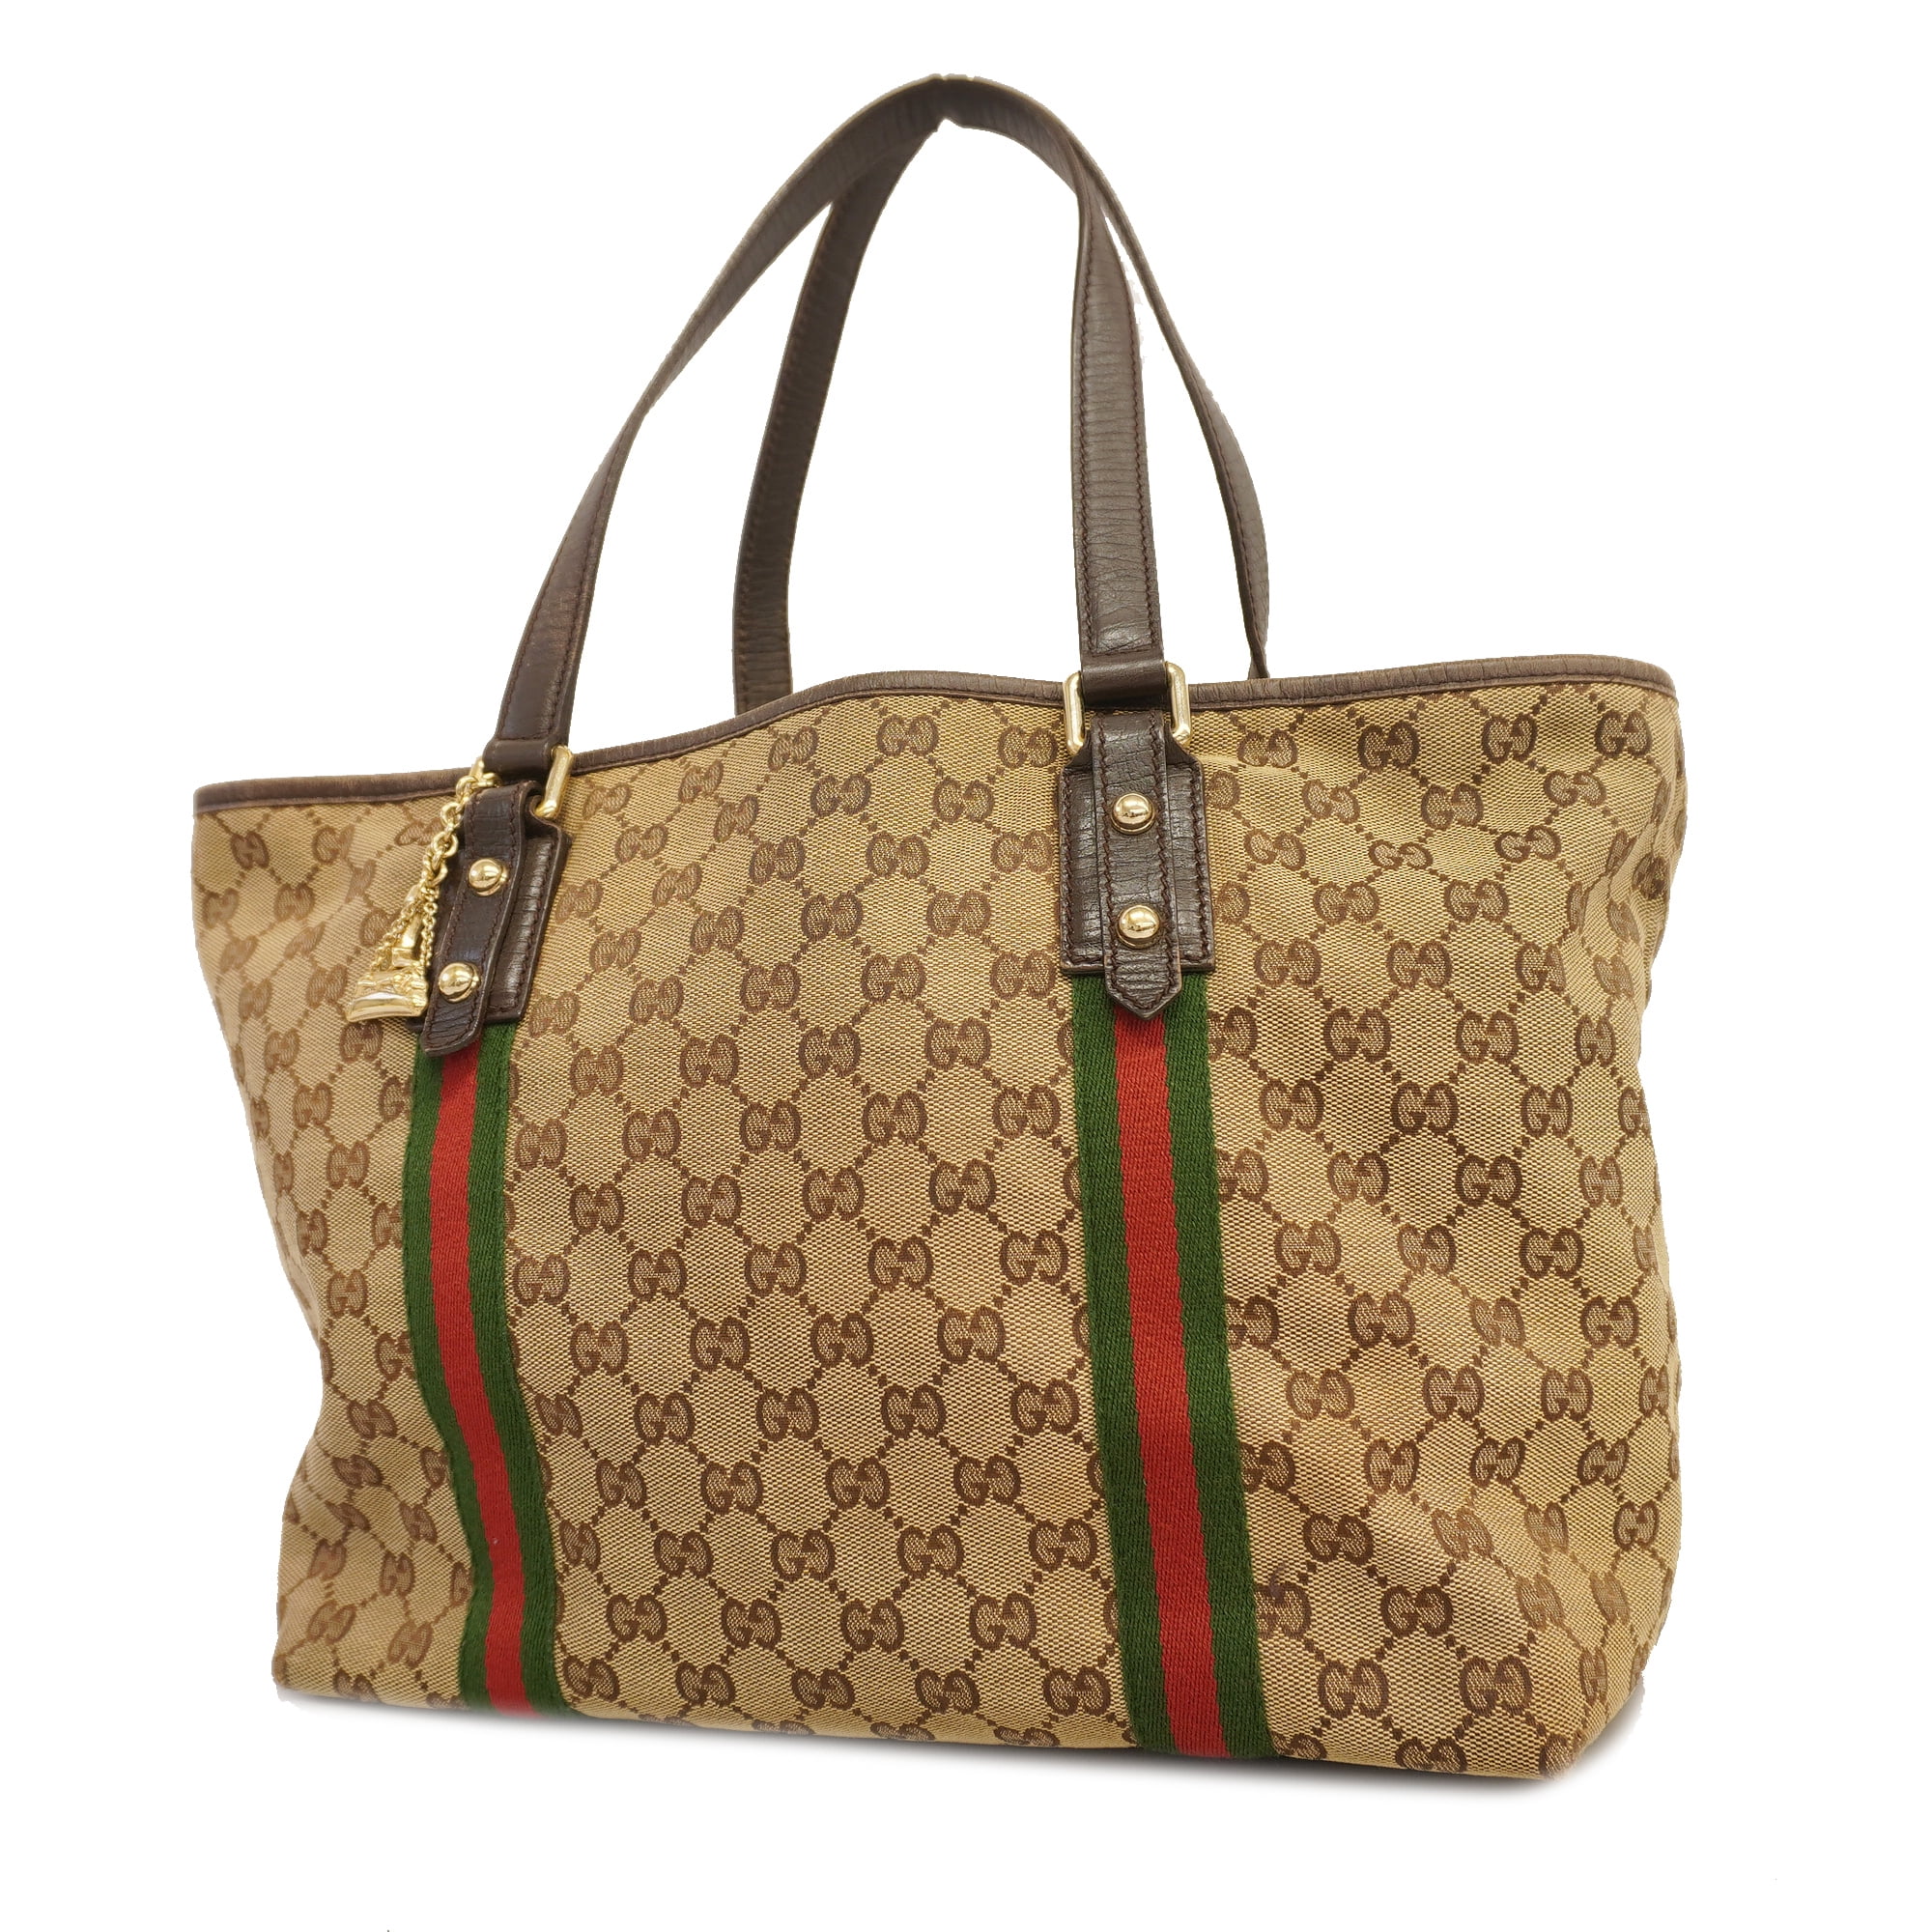 Auth GUCCI Sherry Line Hand Tote Bag Handbag With charm GG Canvas Leather  139260